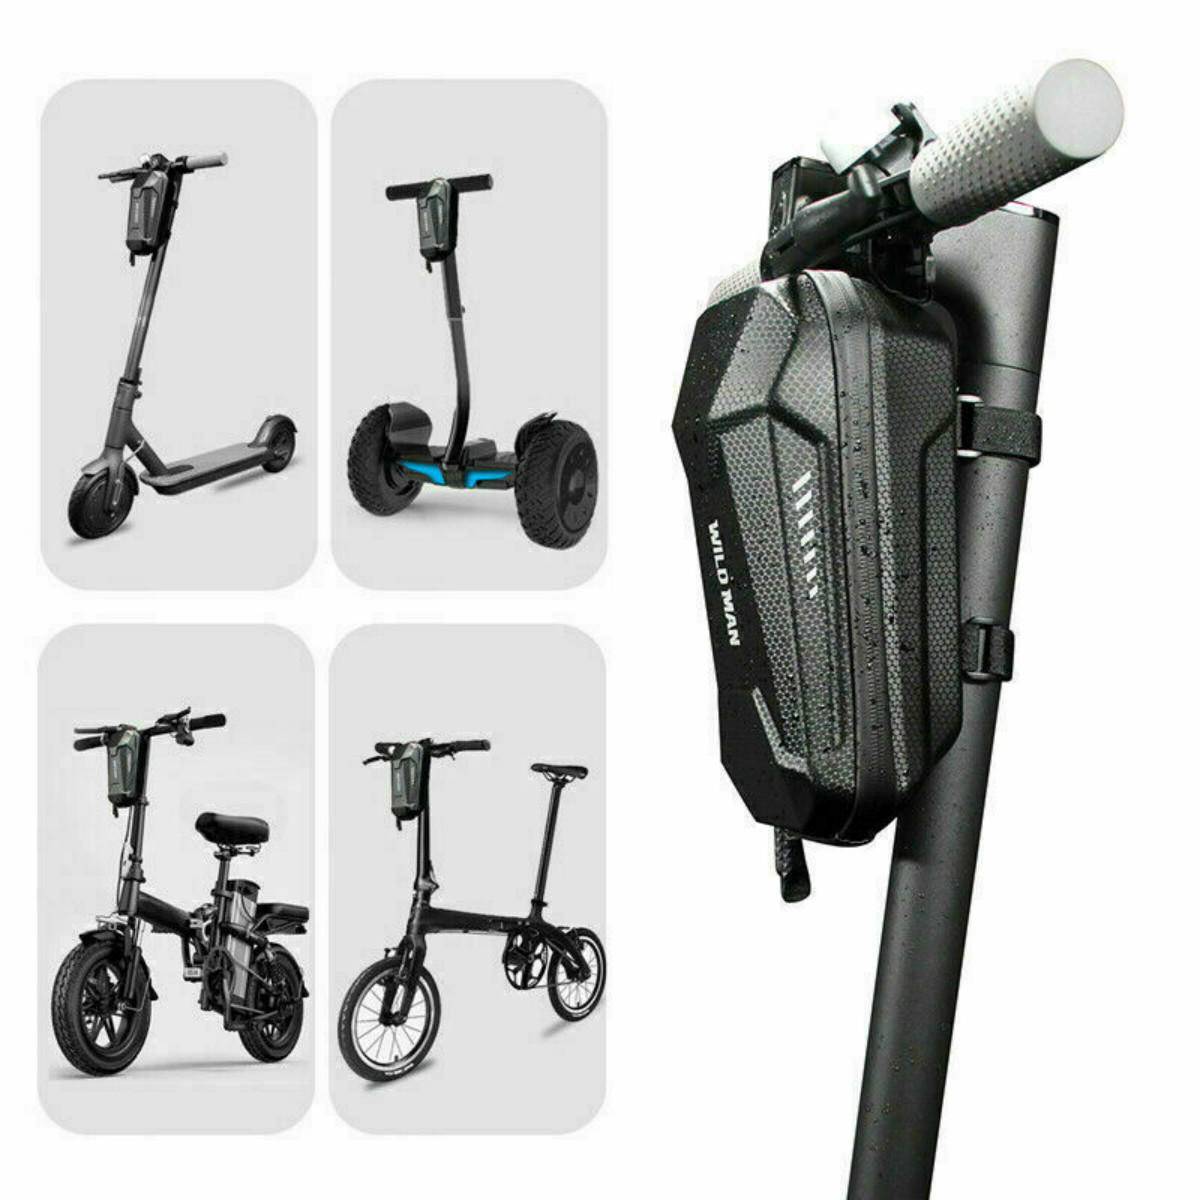 show original title Details about   Wild Man EVA Hard Shell Electric Scooter Storage Bag For XIAOMI mijia M365 NEW